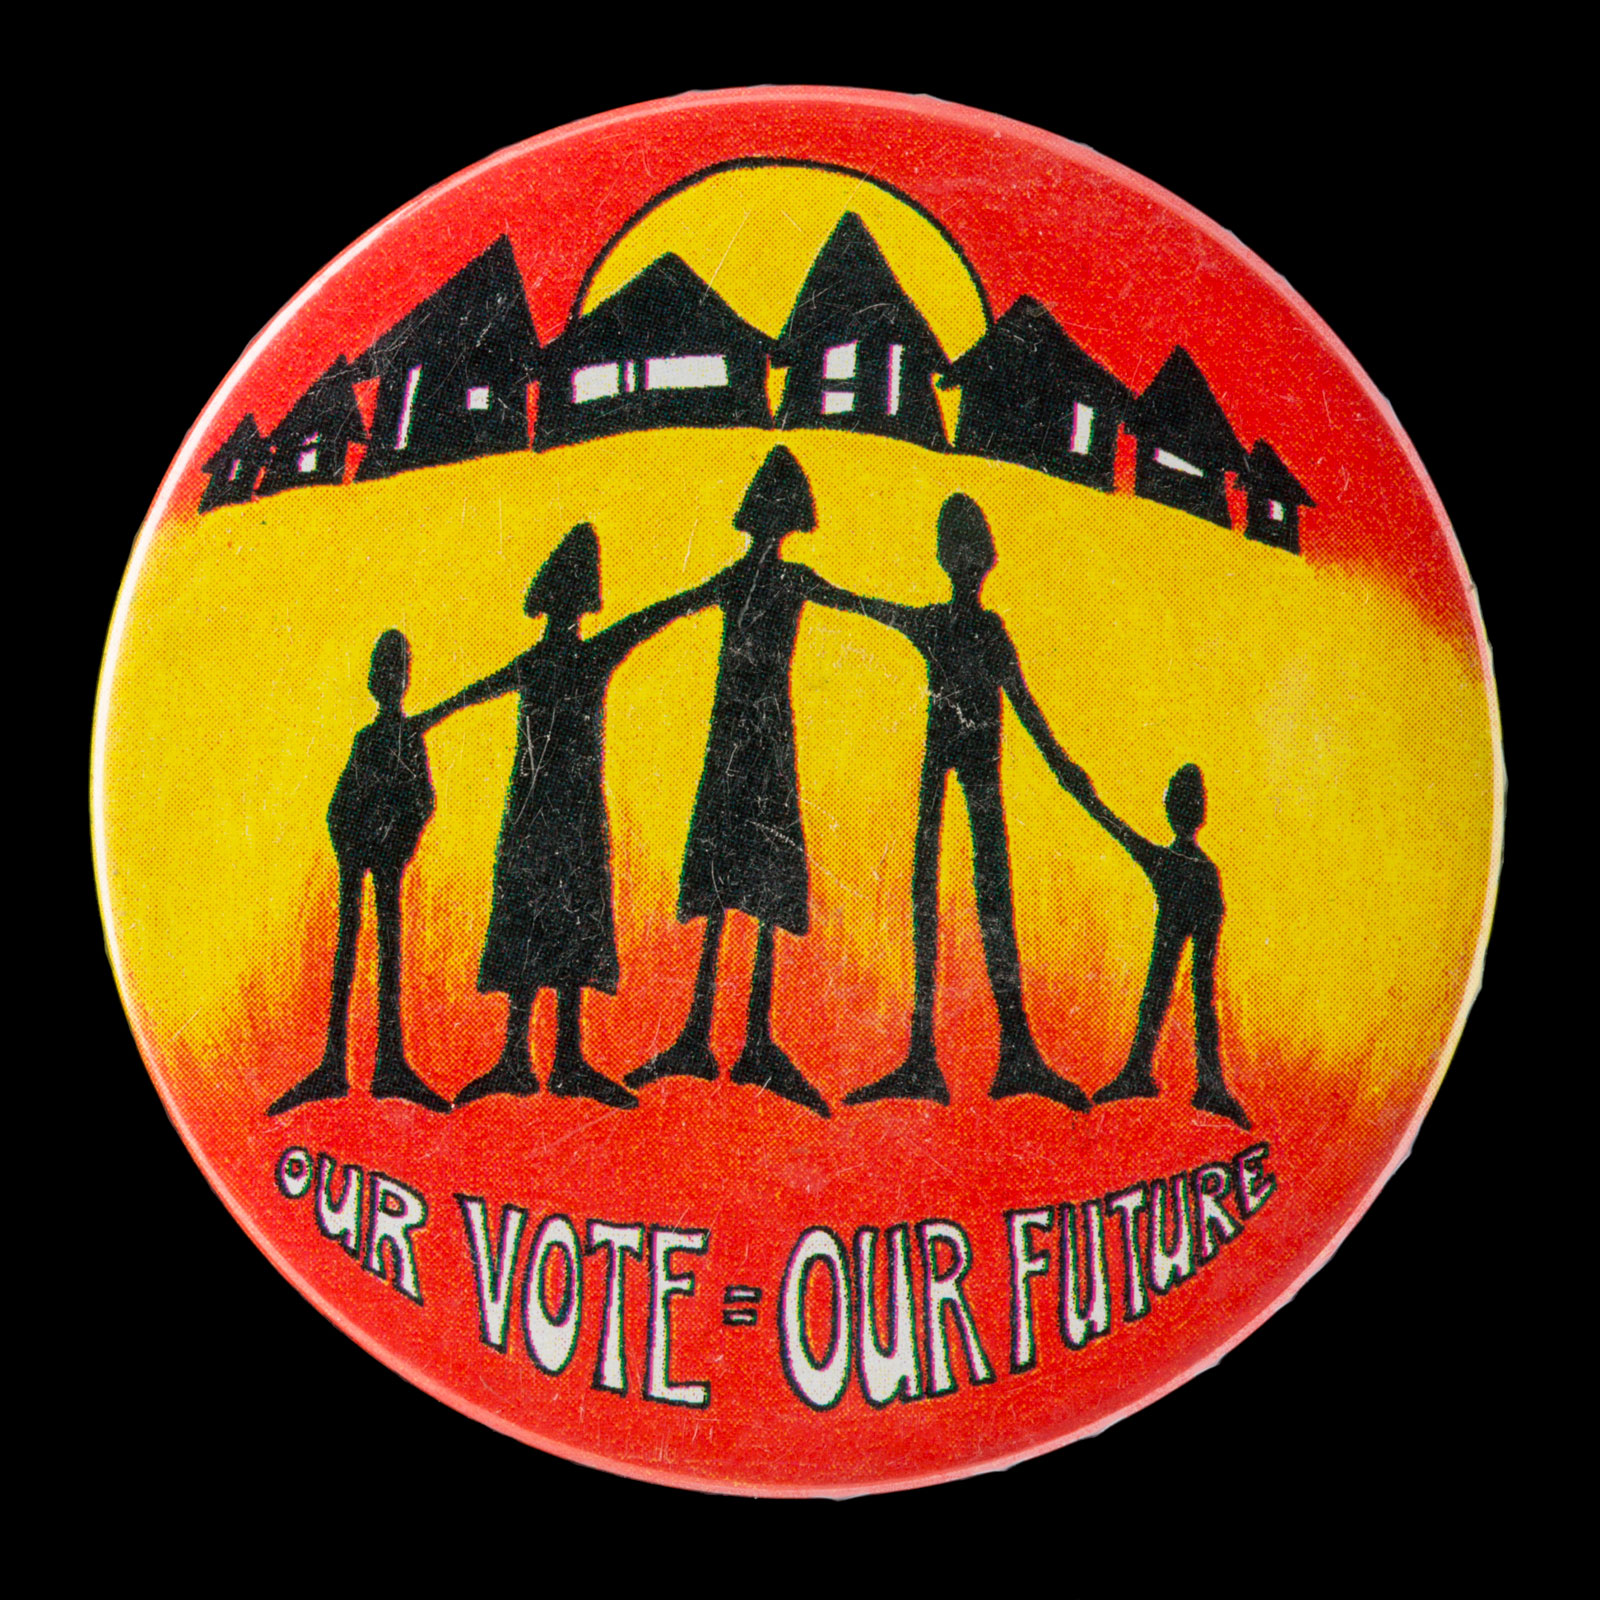 ‘Our vote = our future’ metal badge.